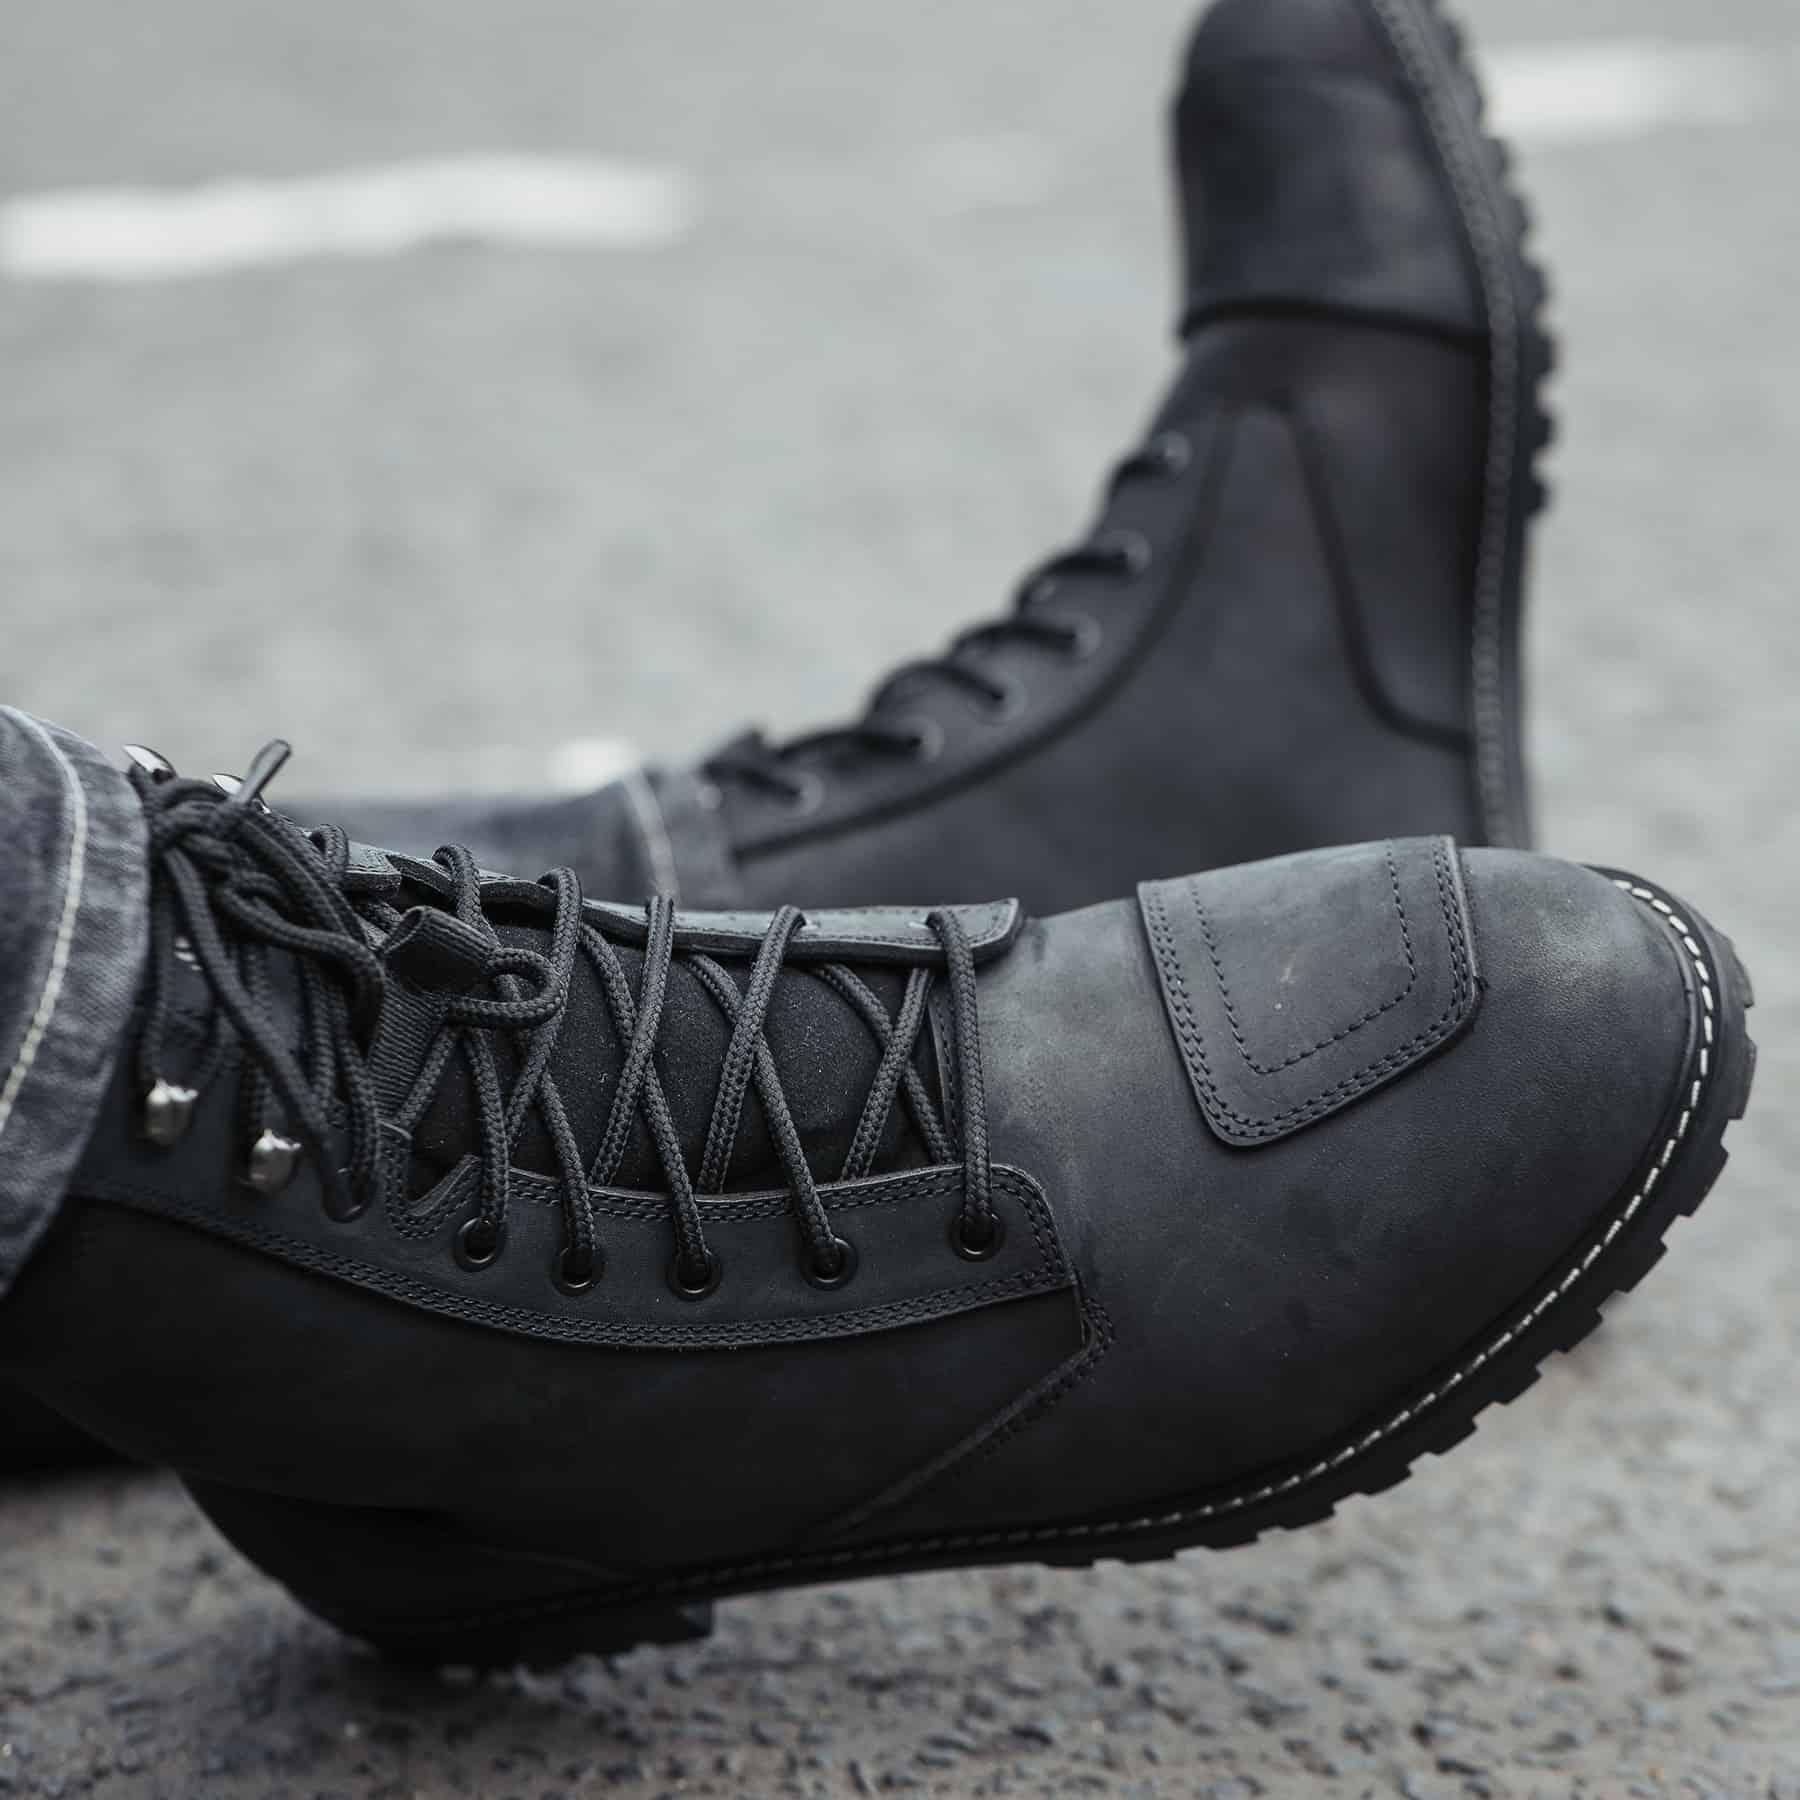 Lifestyle image of the Merlin Drax II boots in black